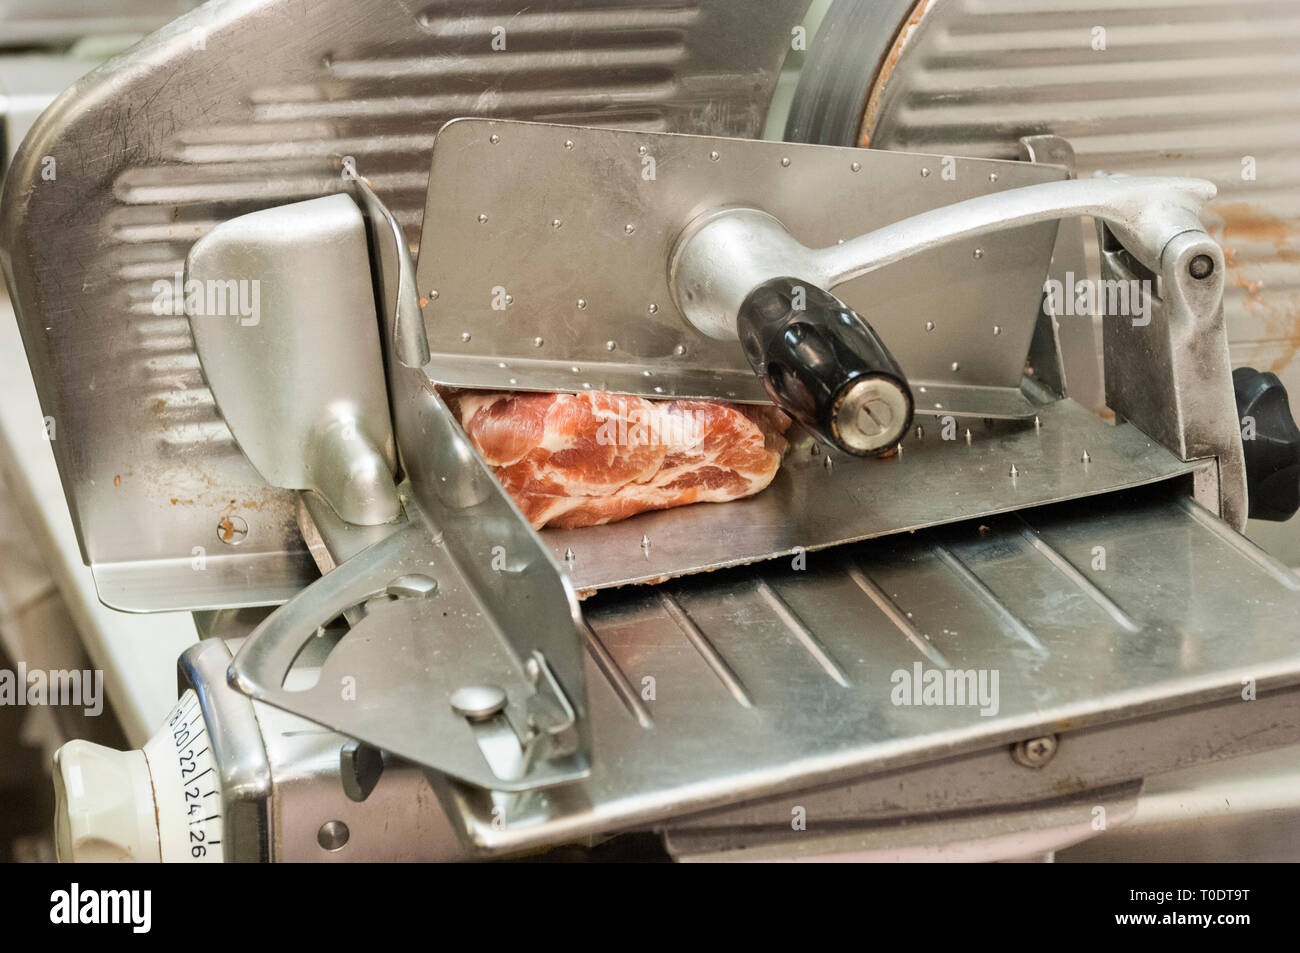 Cutting machine with meat piece, Sweden. Stock Photo